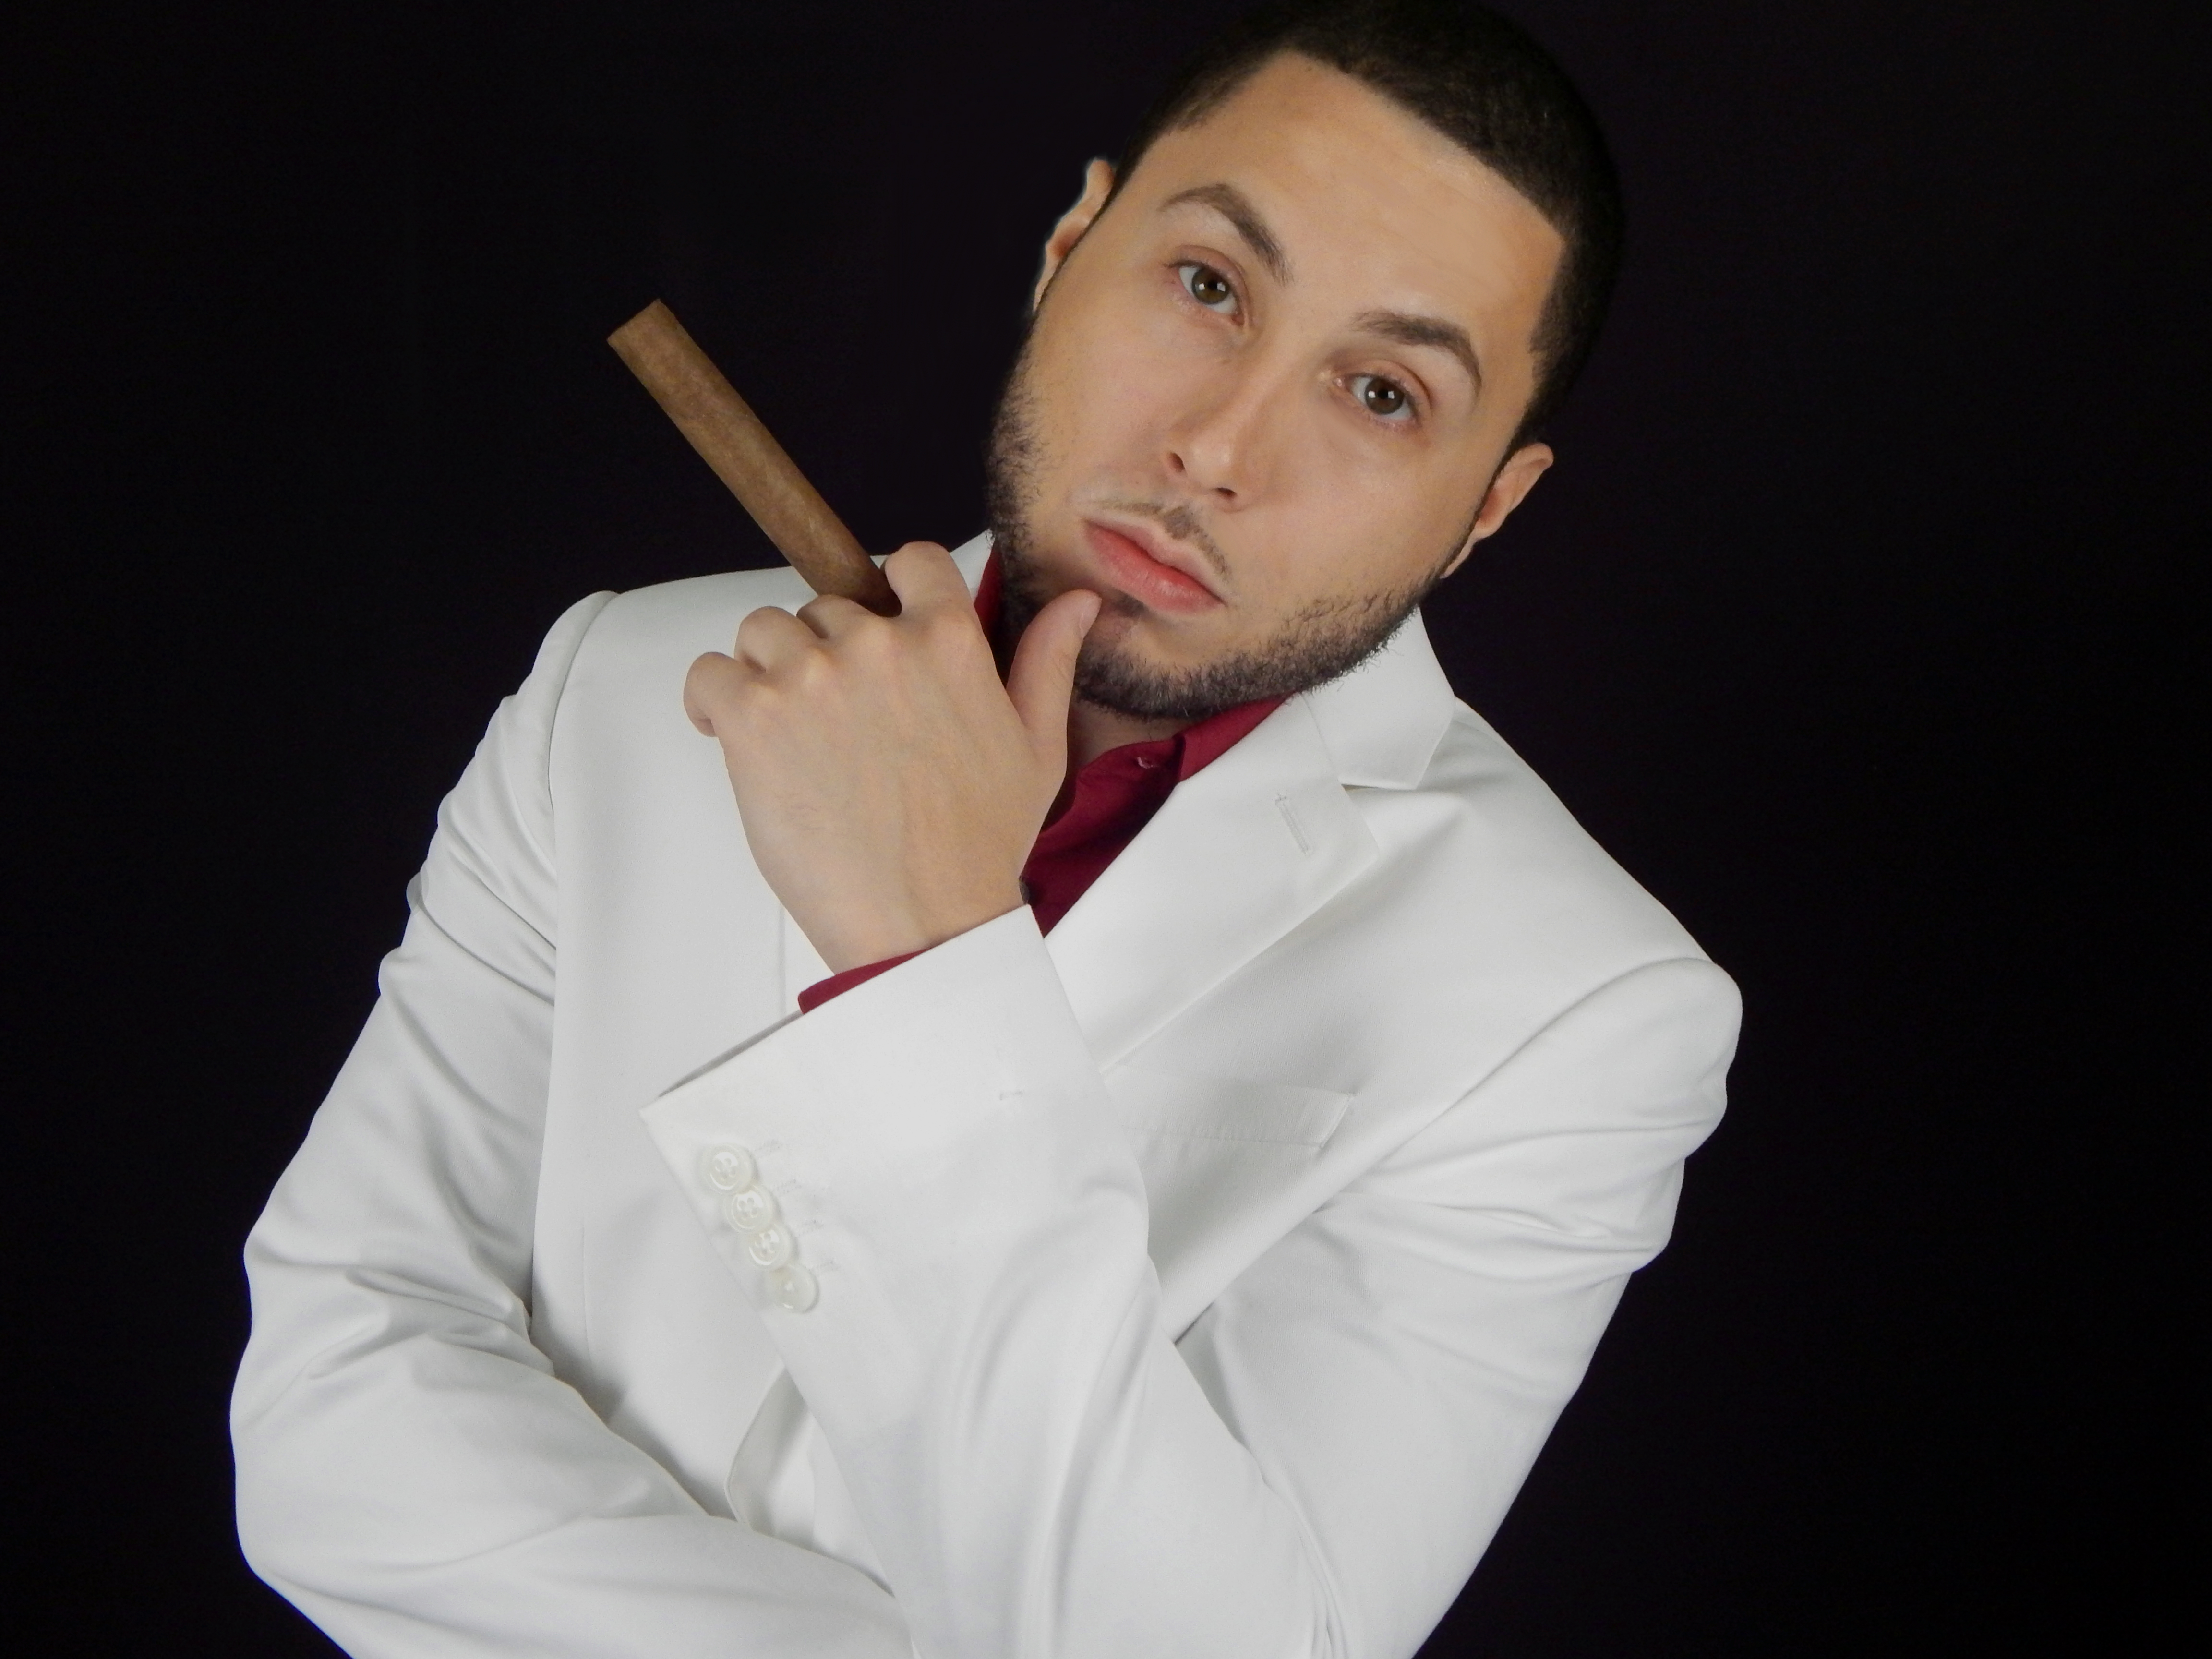 Need a cigar puffing mobster or boss for your project? look no further